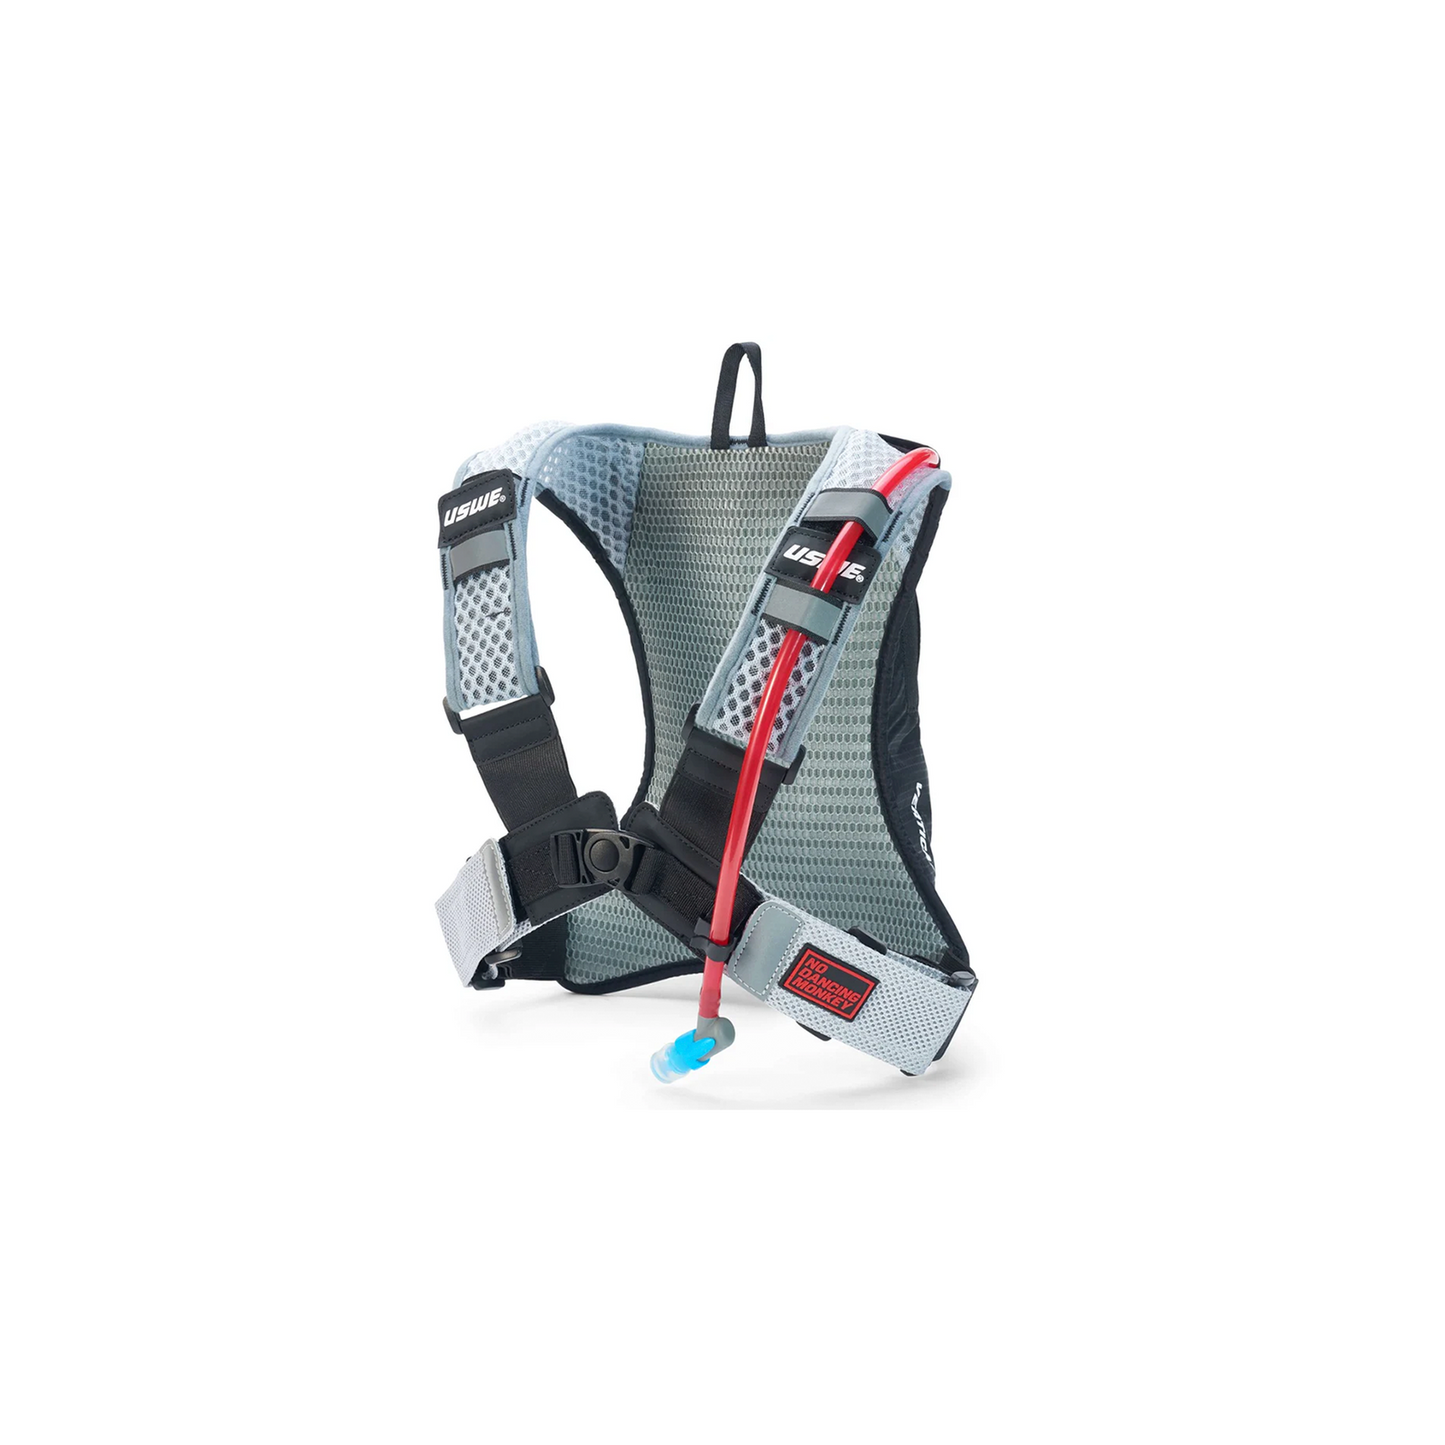 Vertical 4L Hydration Pack | Complete Cyclist - VERTICAL 4 Plus is a lightweight hydration backpack designed for the performance minded, multi-sport enthusiast who needs 4L of storage capacity to carry personal gear and hydration. Whether you need a running backpack, skiing backpack, bike backpack, or motorcross backpack the VERTICAL got you covered.